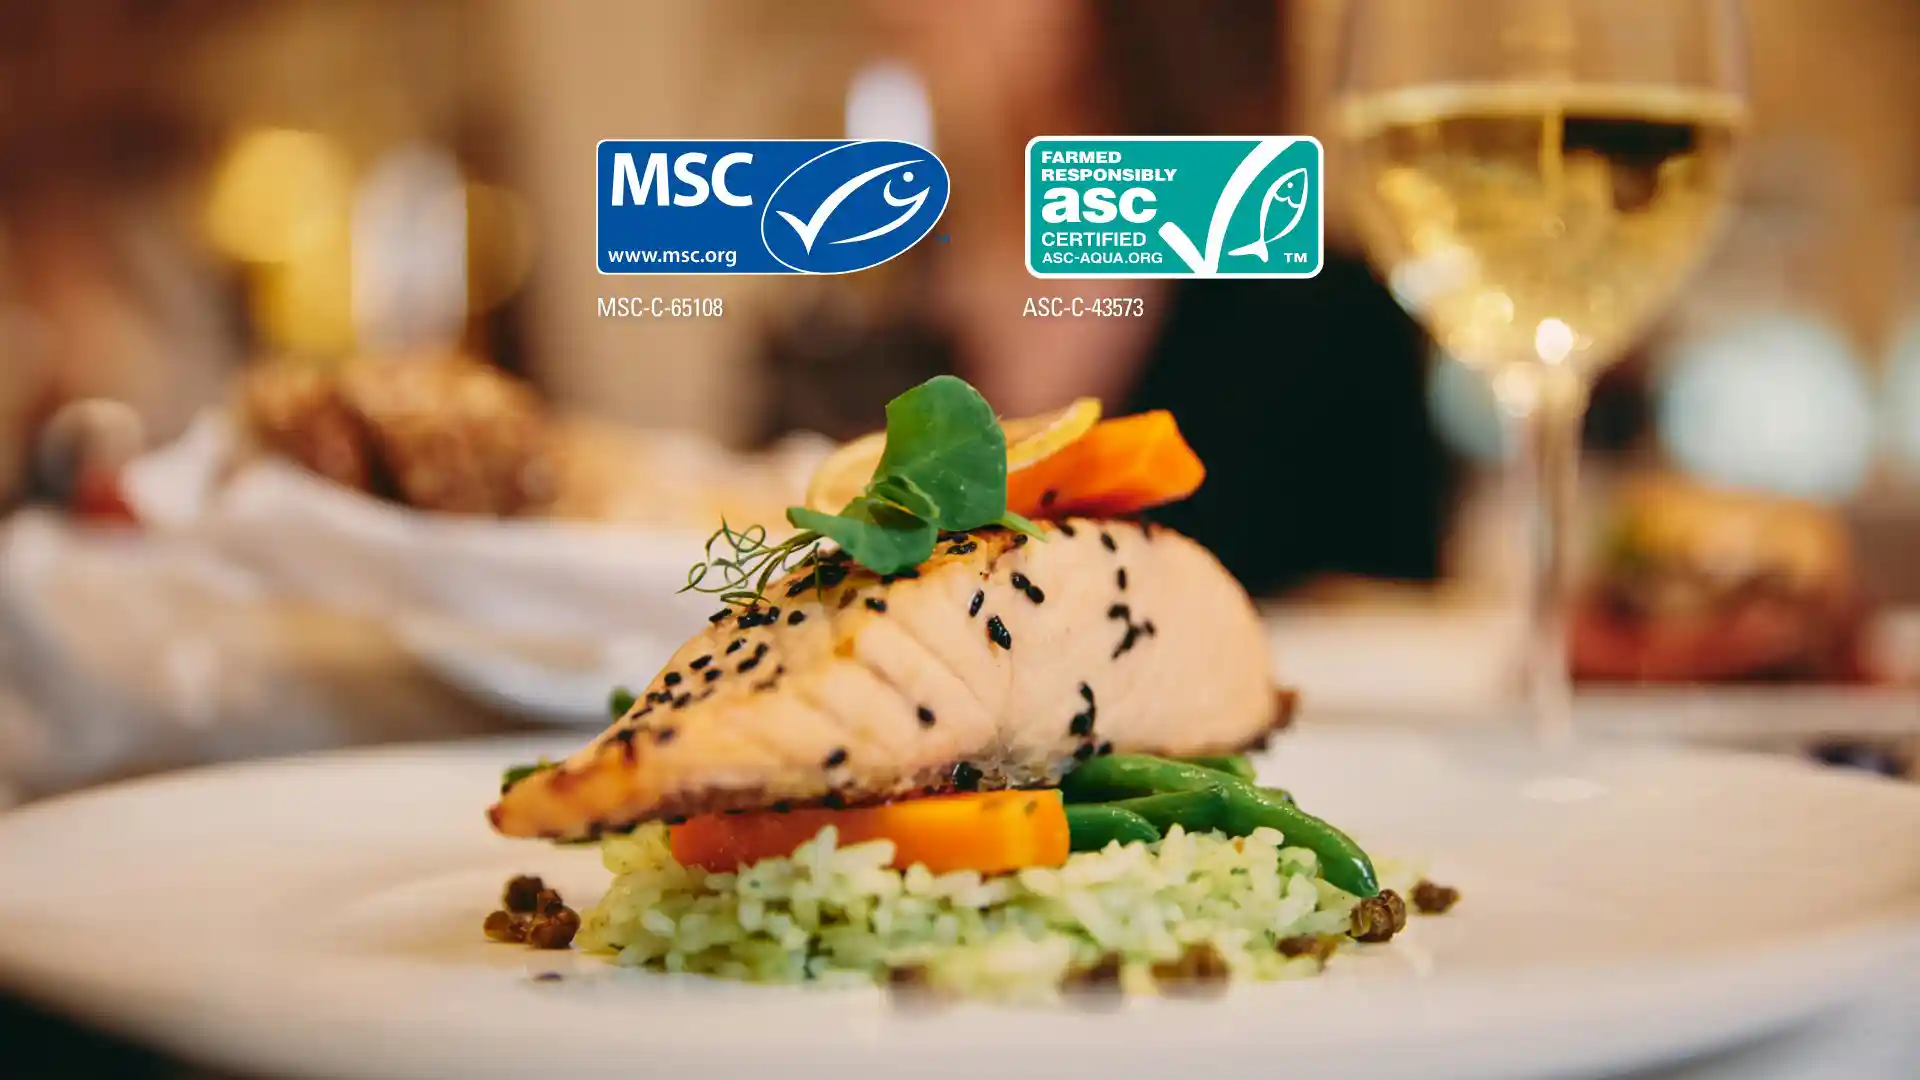 Post: New Certifications Expand Our Global Fresh Fish Program